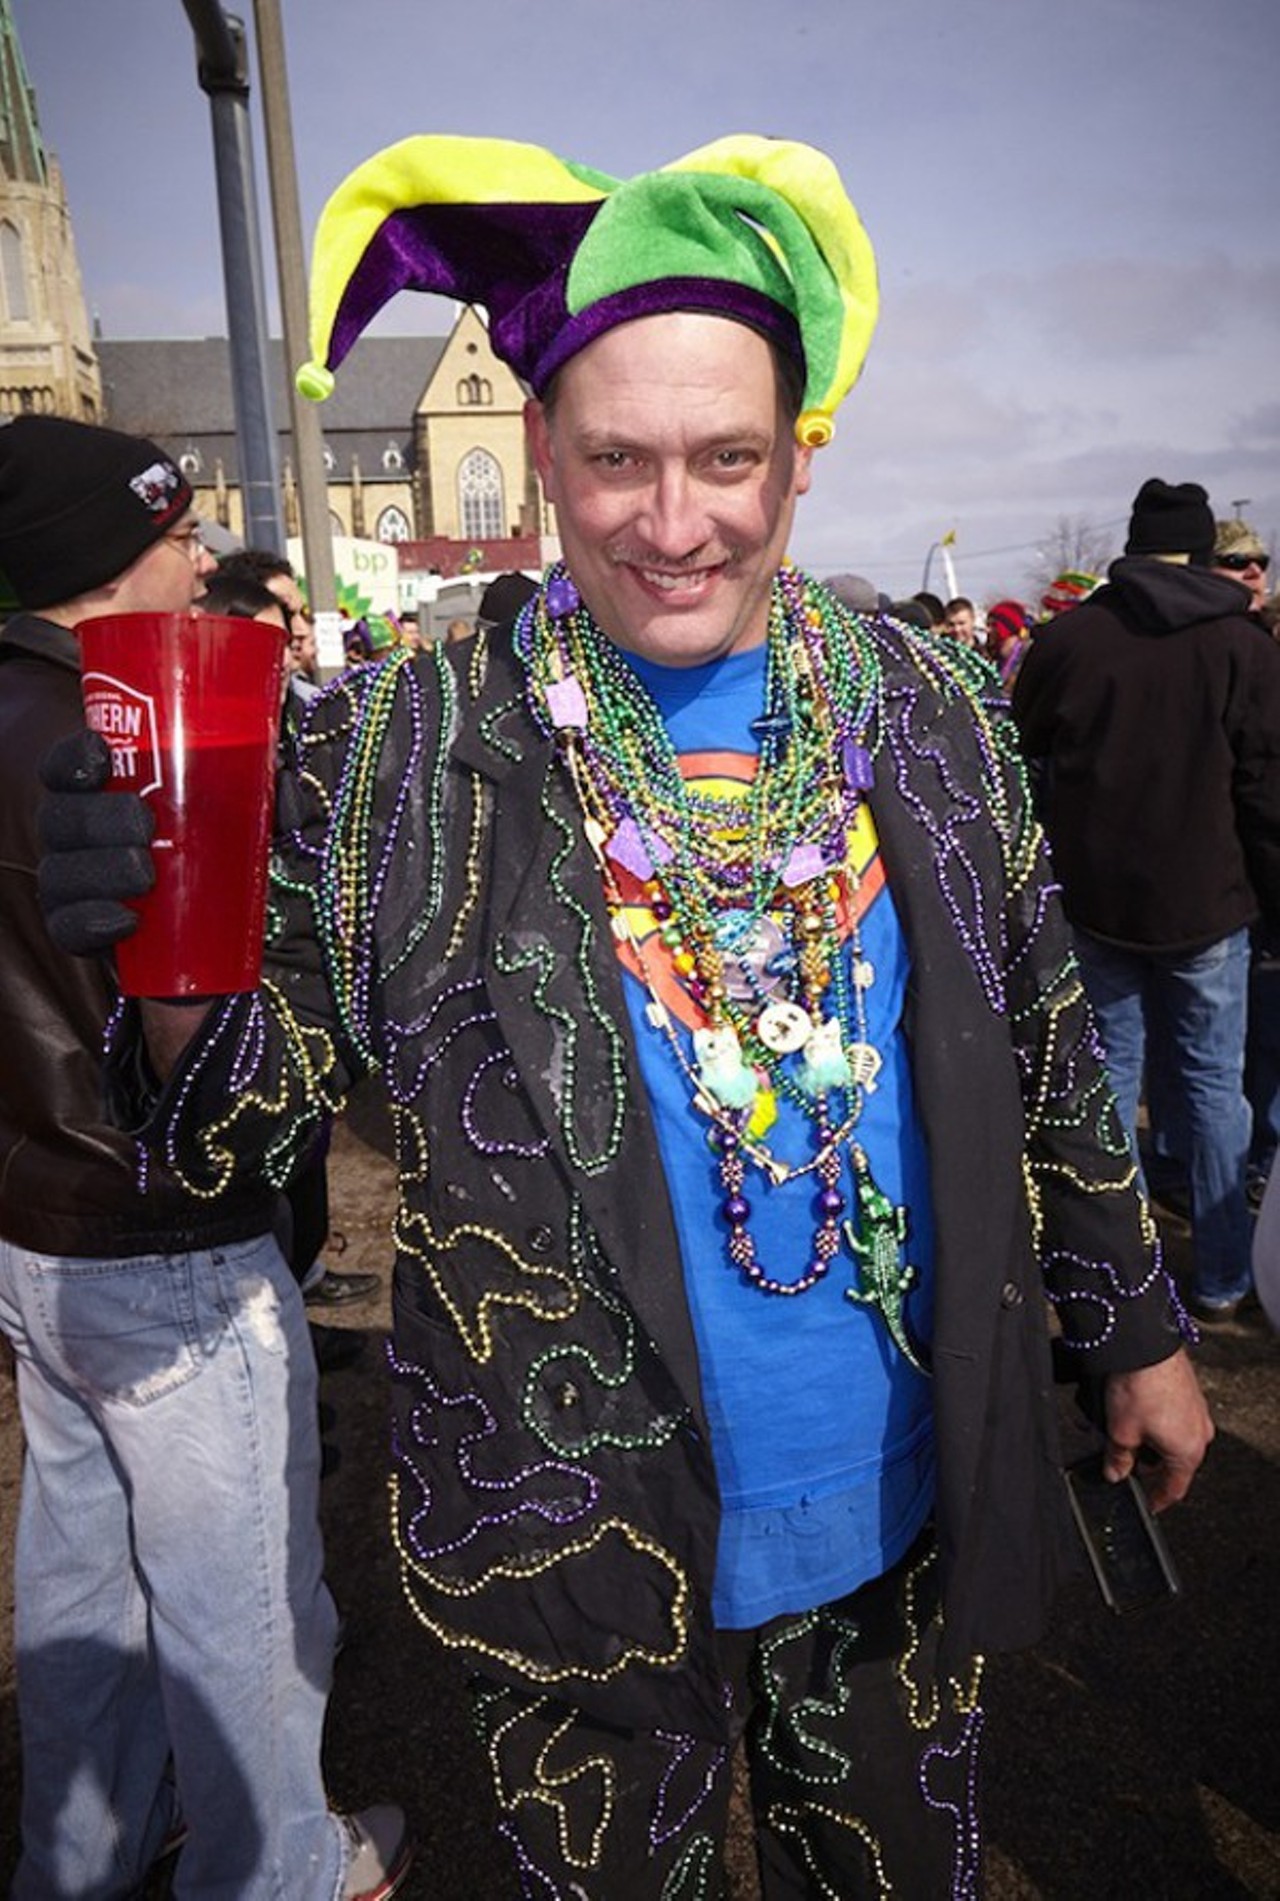 Those oddballs who have more beads on than Mr. T has chains.